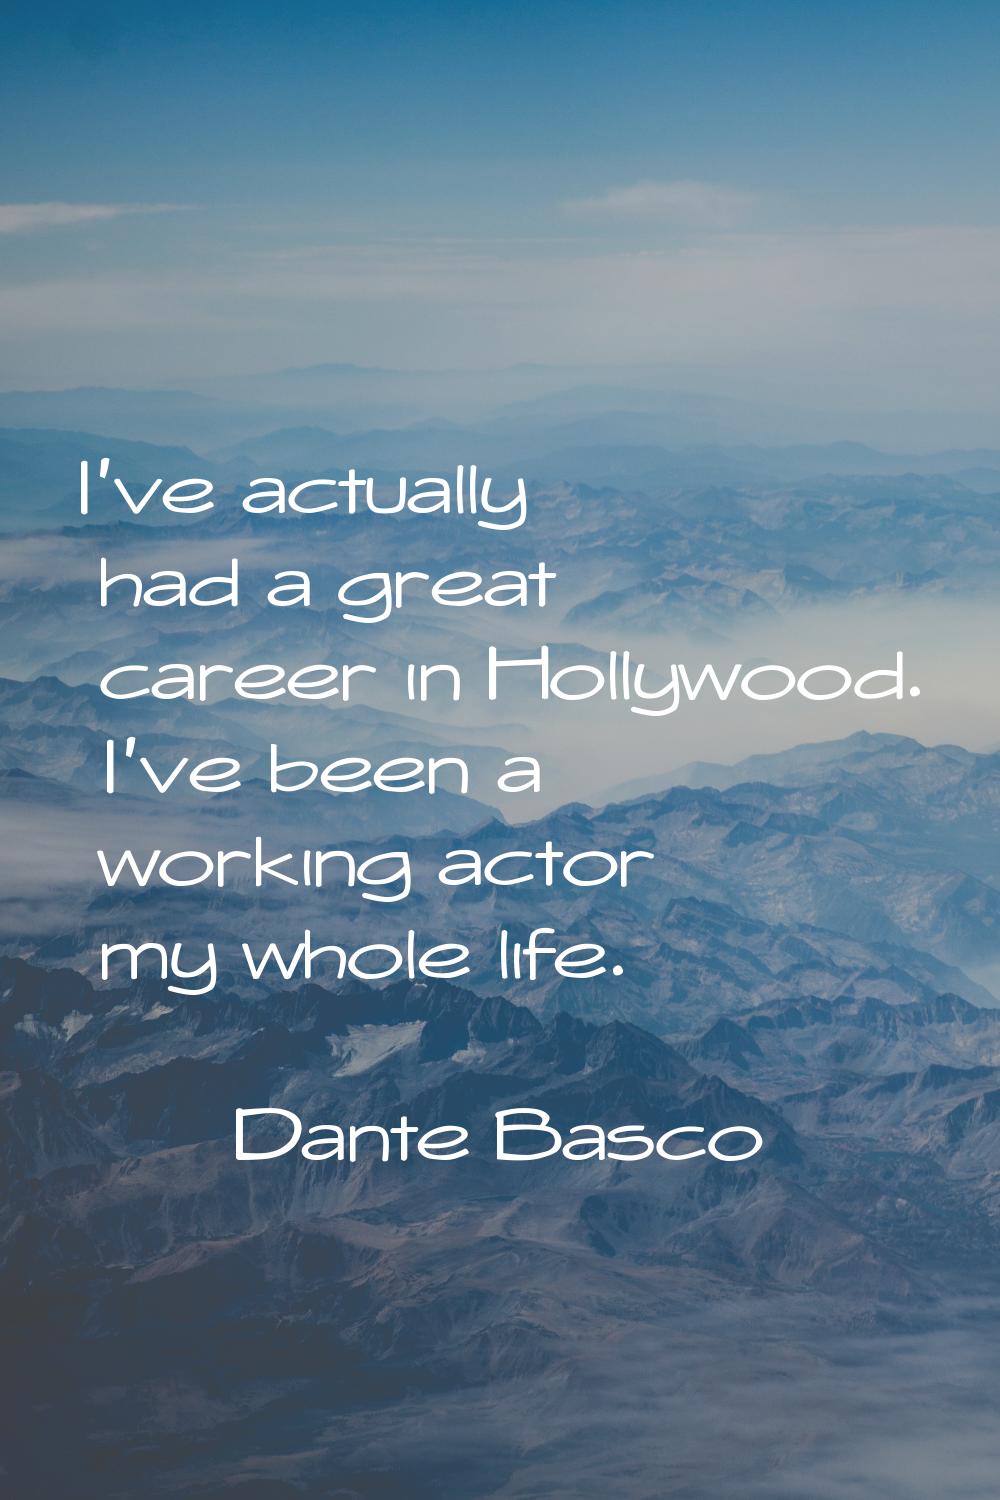 I've actually had a great career in Hollywood. I've been a working actor my whole life.